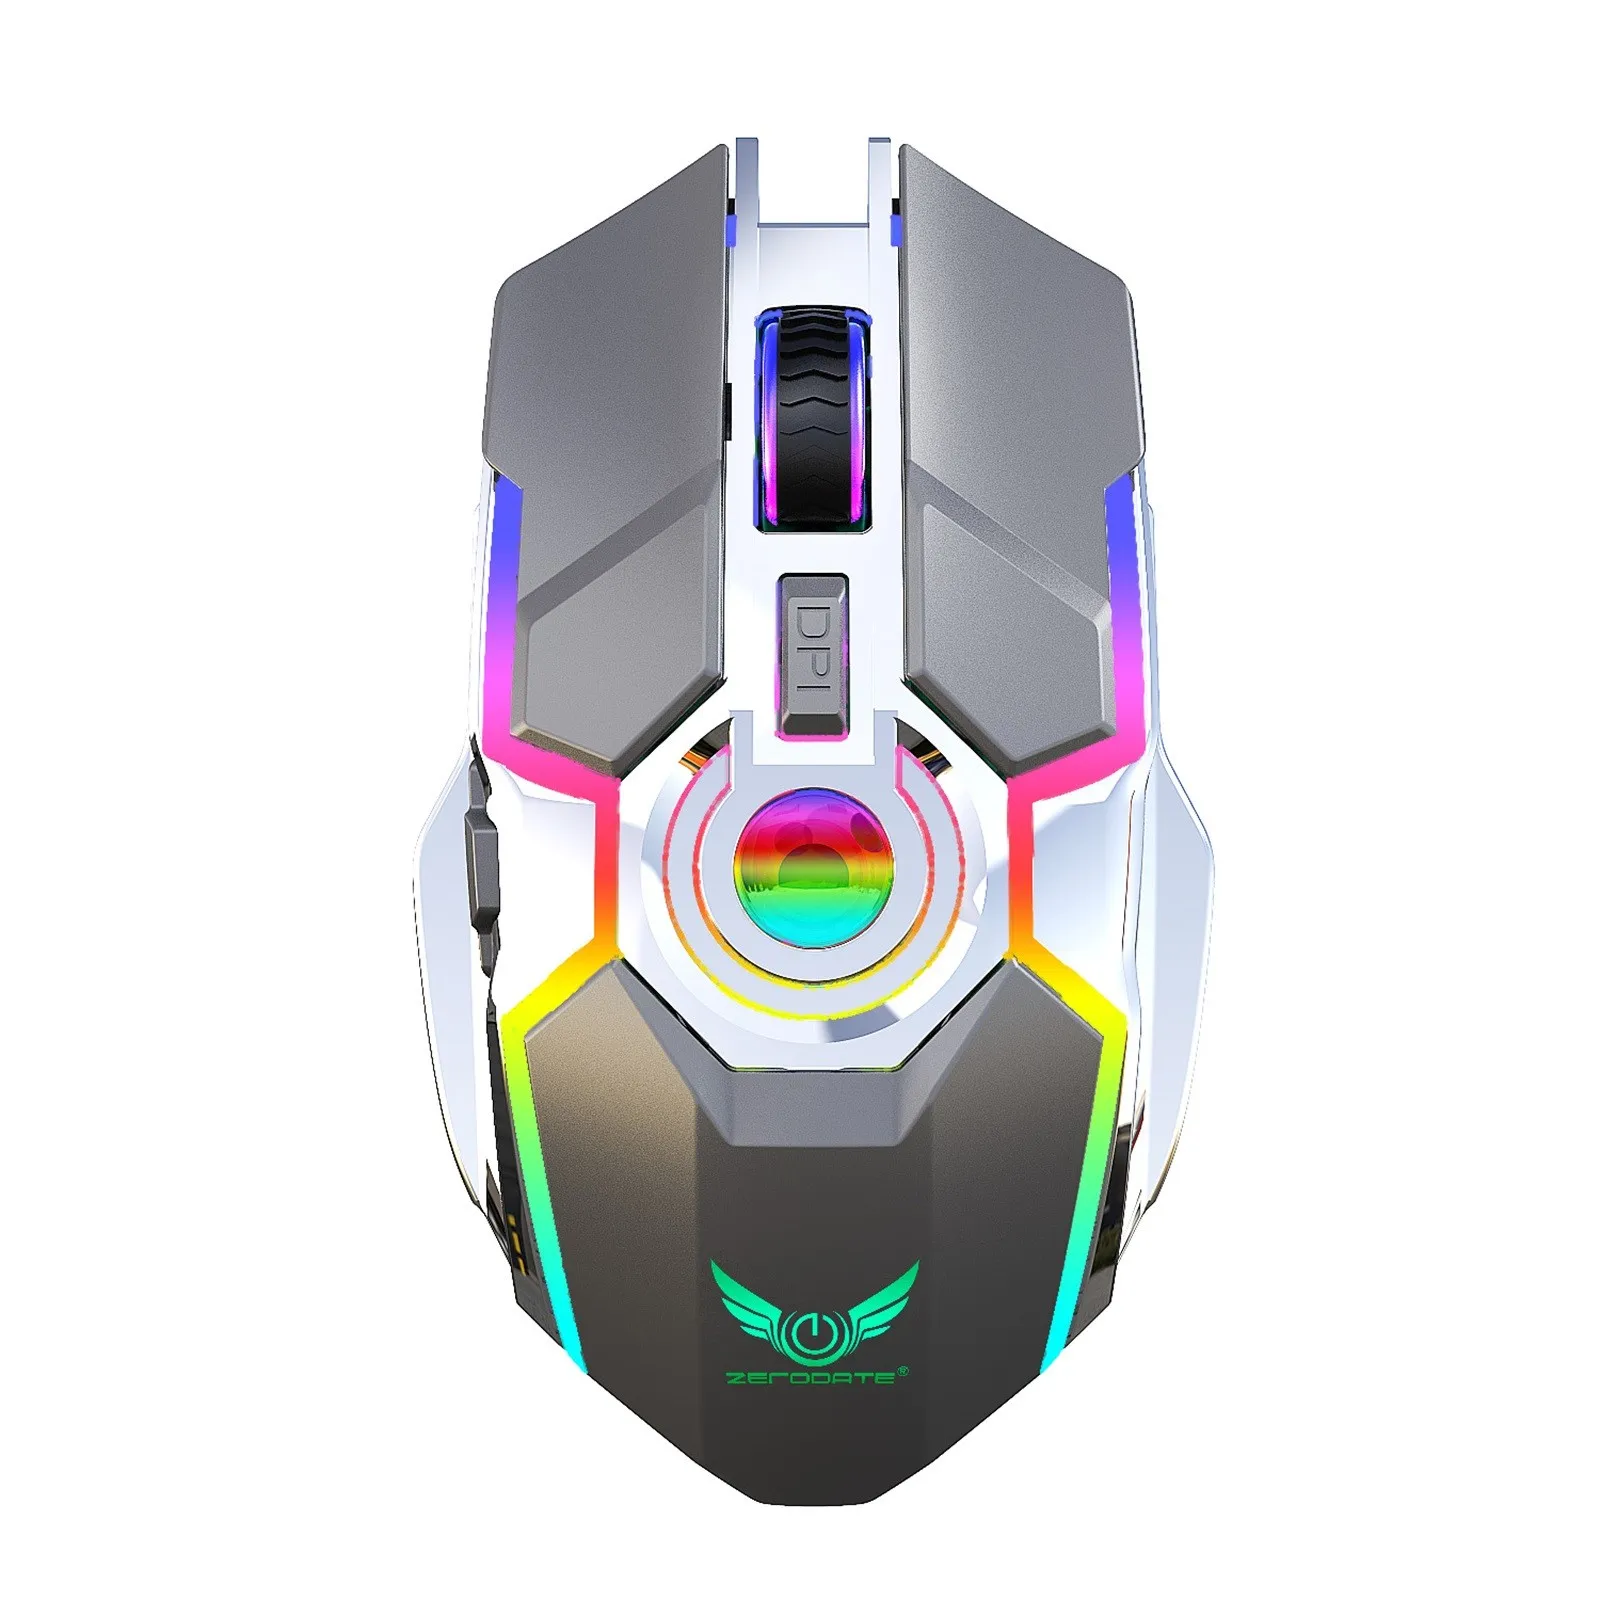 

ZERODATE-T30 Wireless Mouse Rechargeable Gaming Mice 2400 DPI 7 Buttons RGB Glow 2.4G Mouse Ergonomic Design Mechanical Mouse